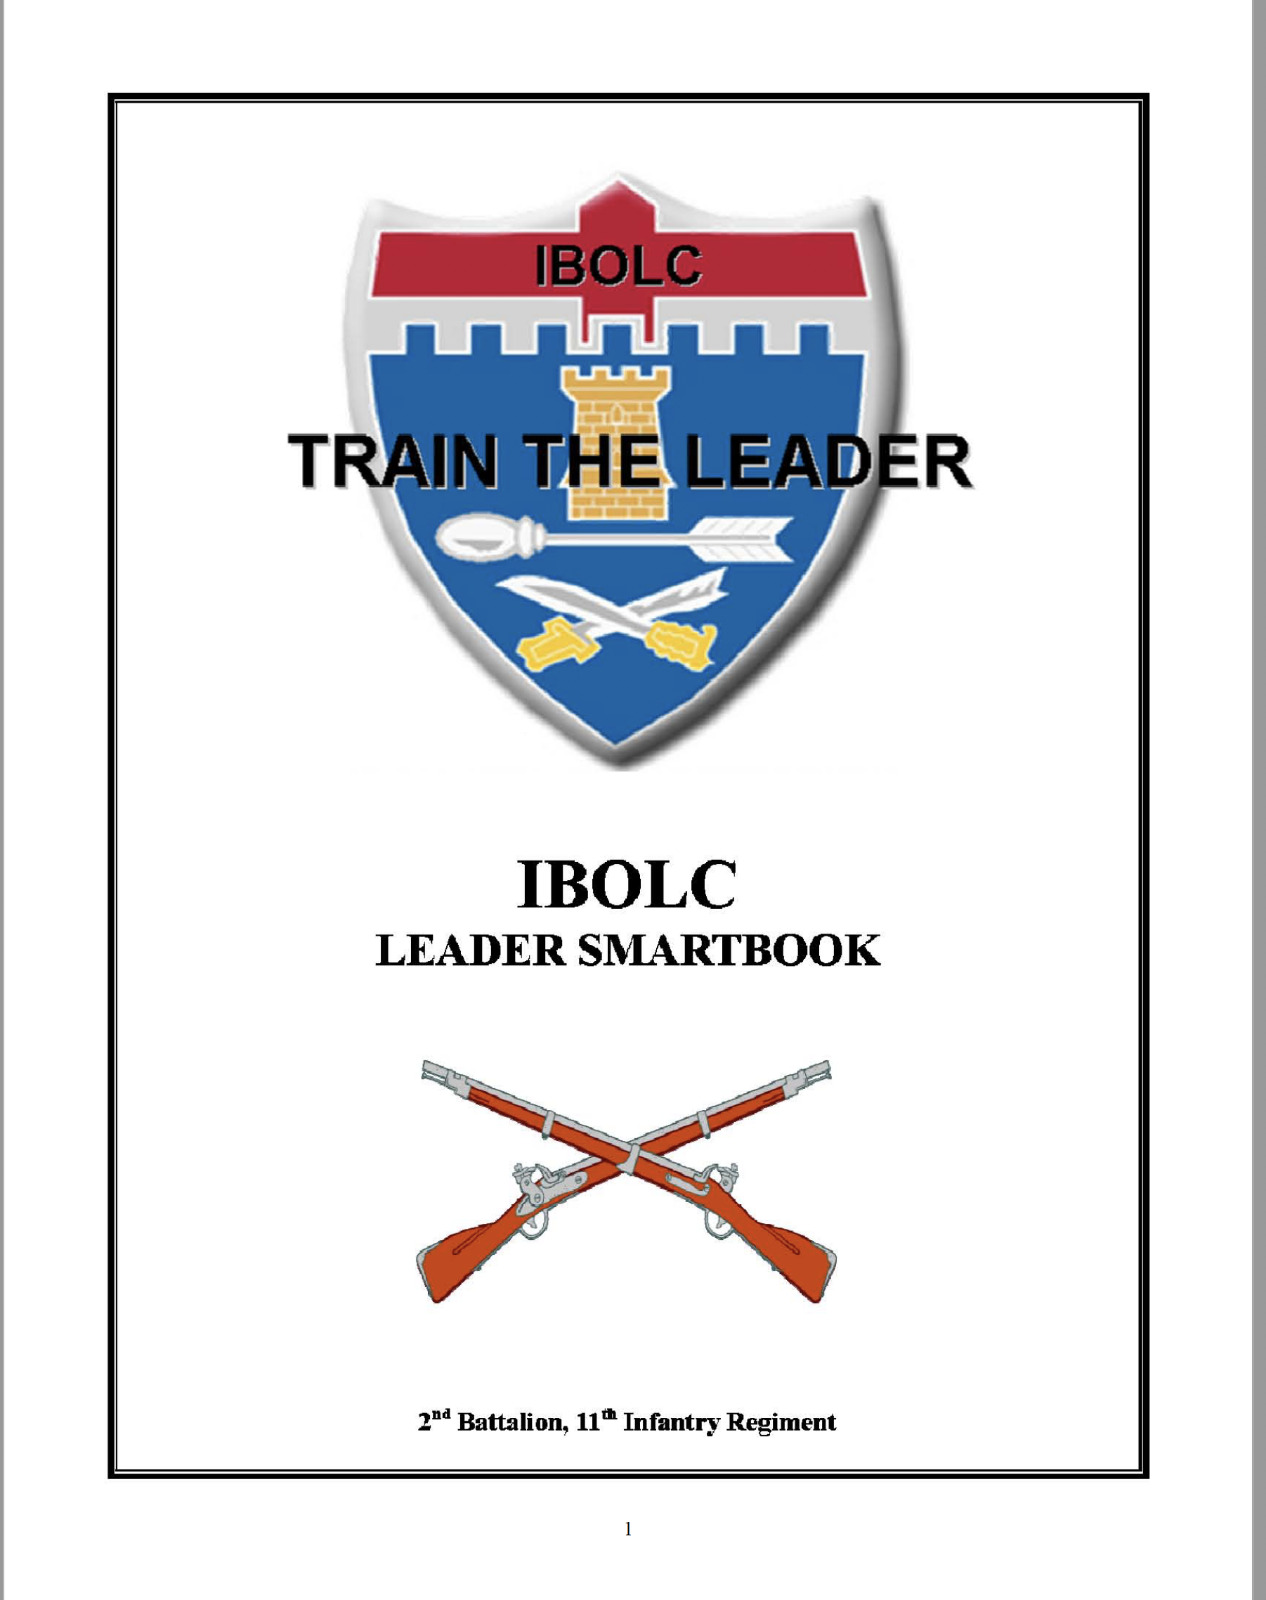 106 Page Army Infantry Officer Basic Coure IBOLC LEADER SMARTBOOK Manual on CD